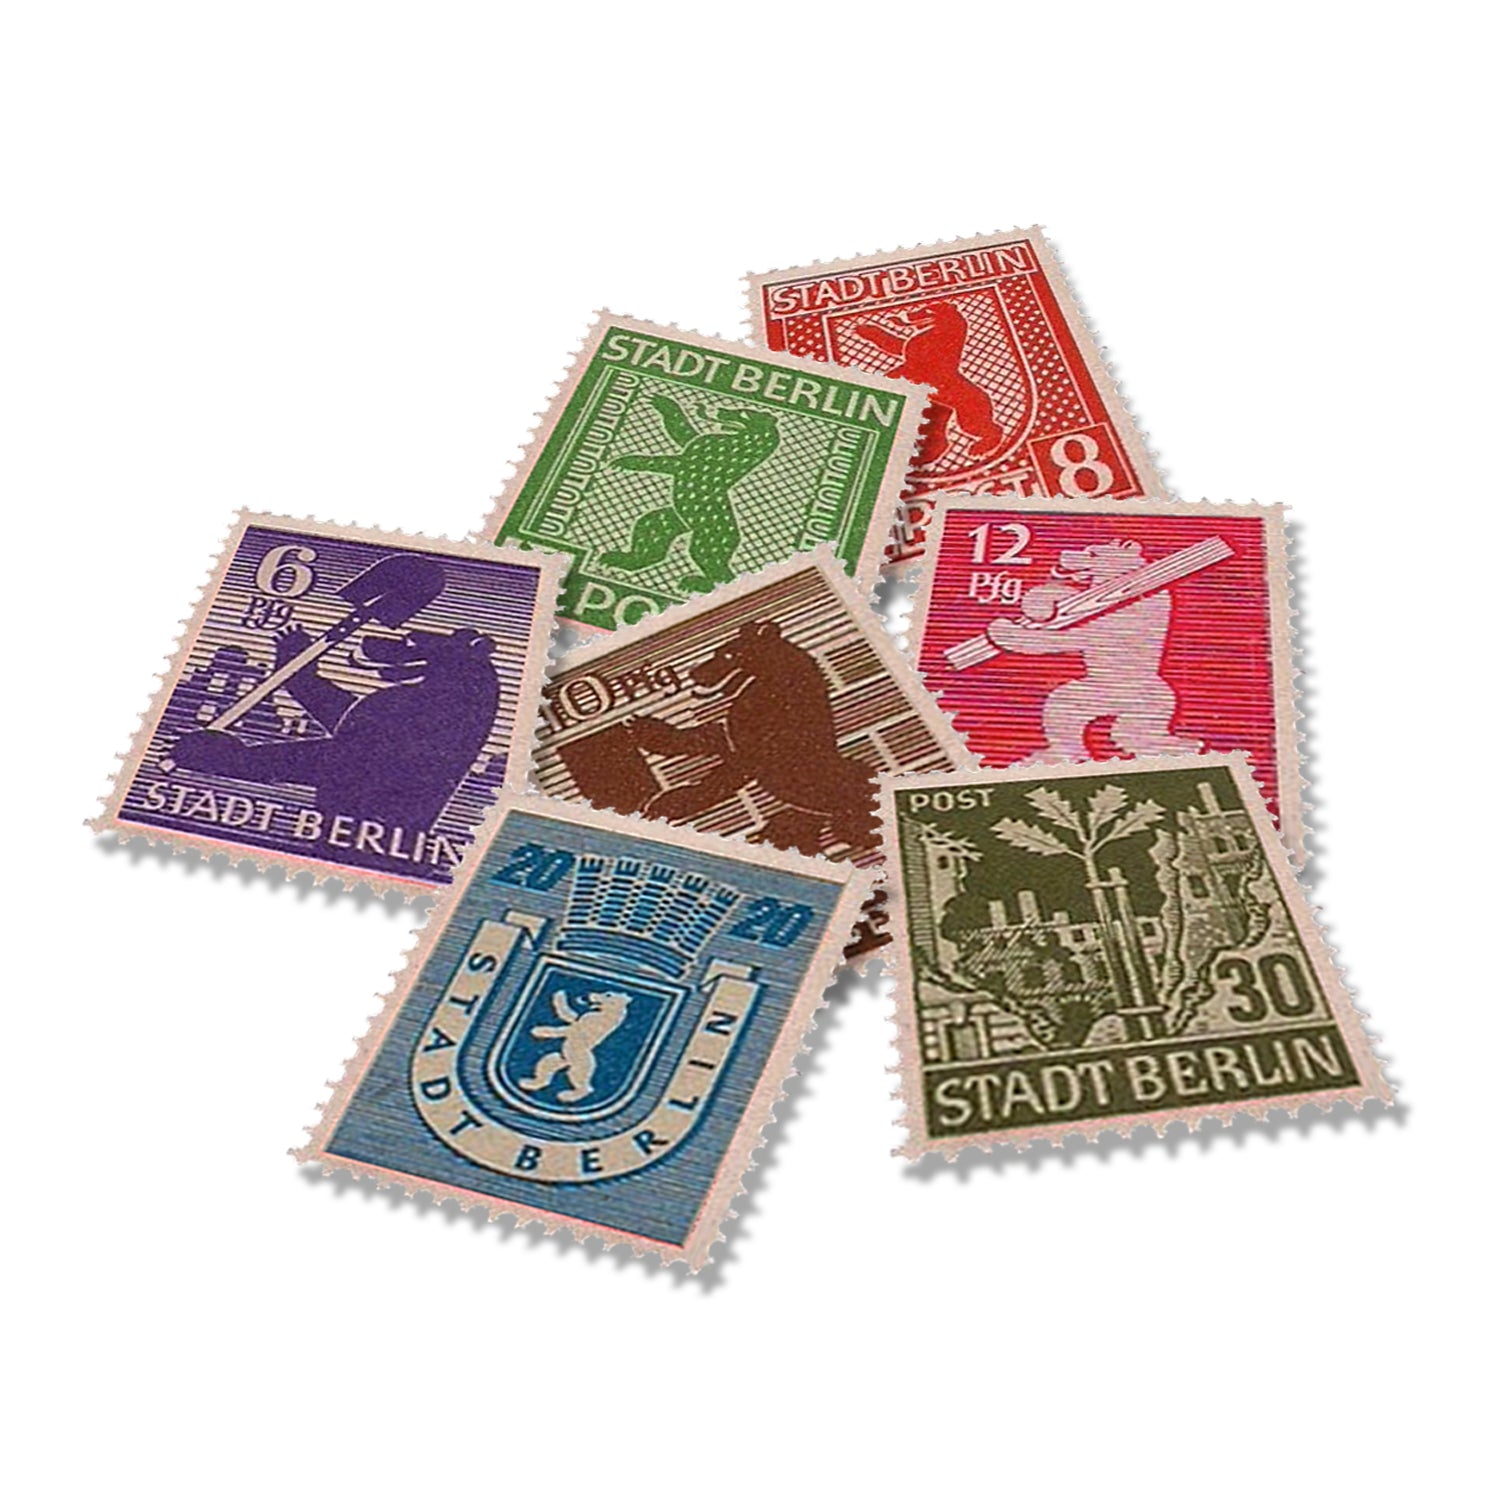 WW2 Memorabilia - 7 Stamps Issued in Berlin 1945 by The Soviet Occupation - The World War 2 Axis and Allies Collection